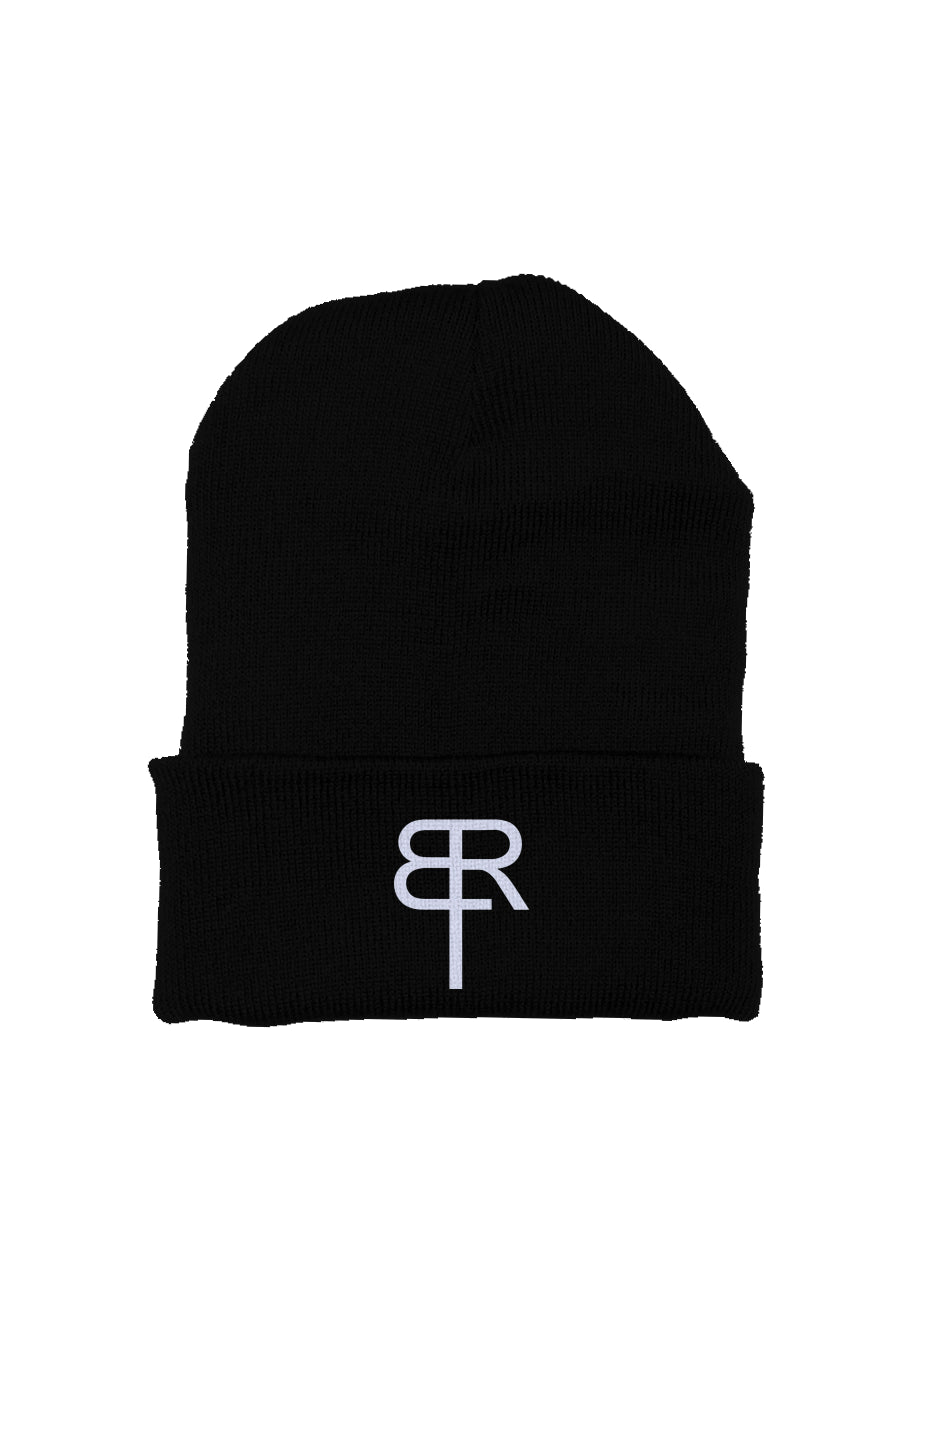 BTR Embroidered beanie - Brought To Reality